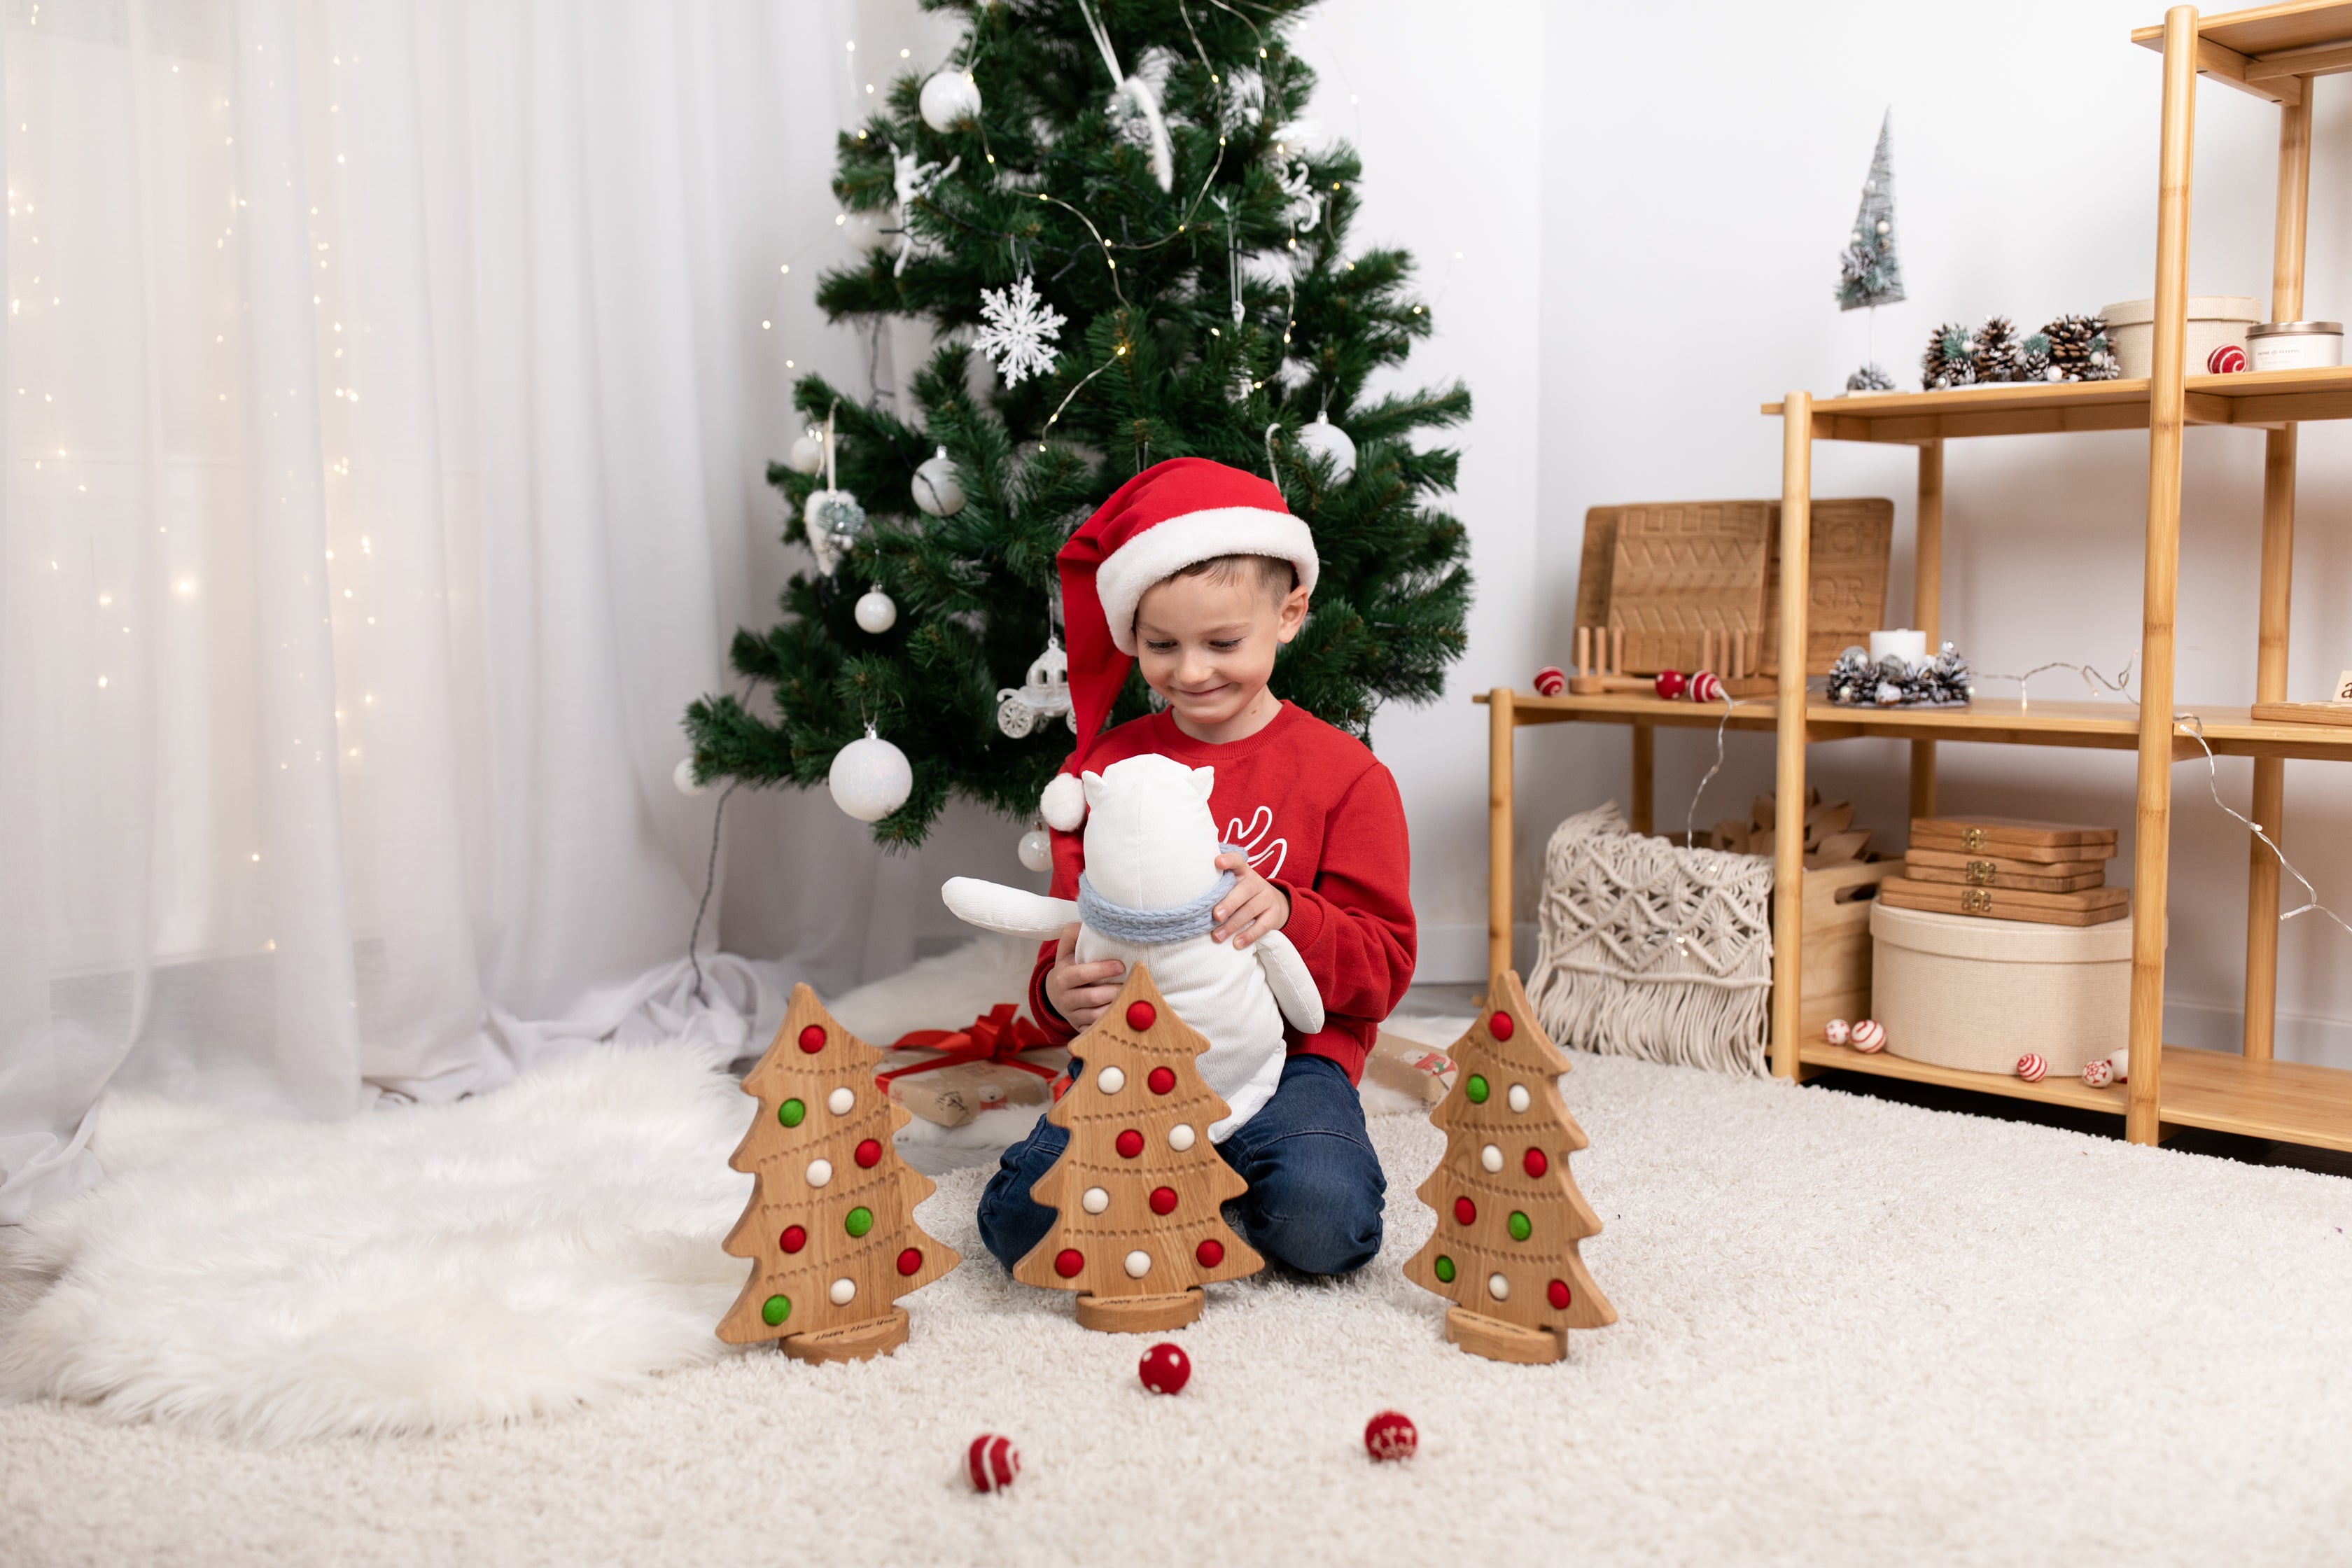 Christmas tree personalized gifts for kids and adults